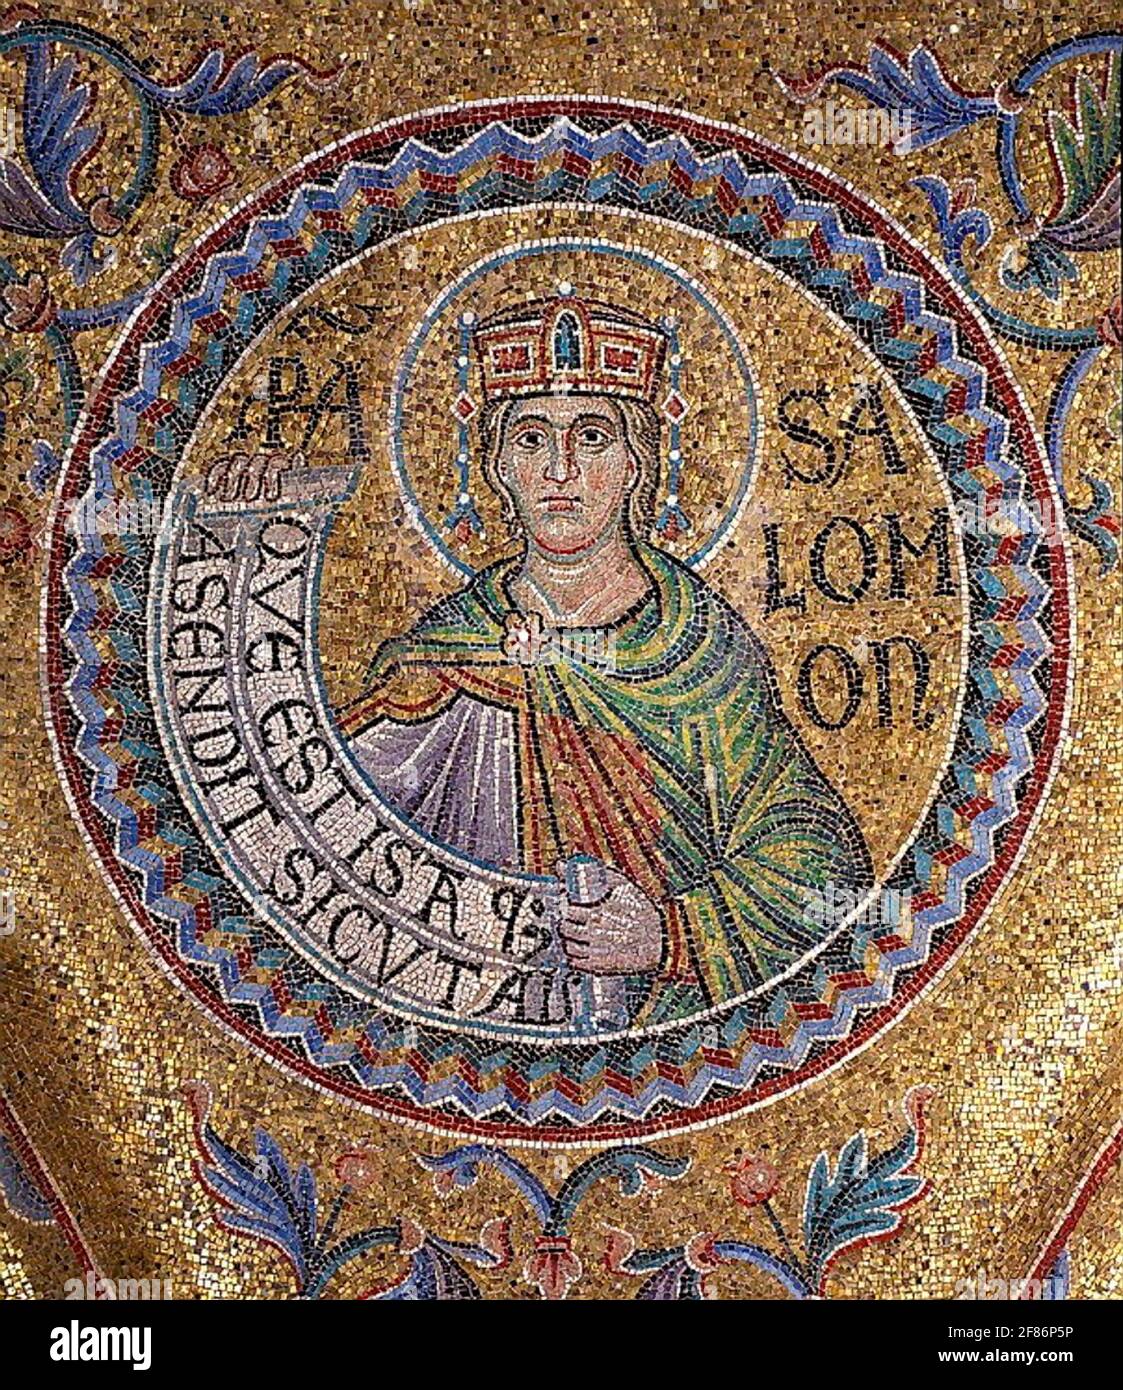 6801. King Solomon, detail of the mosaic in the Basilica of St. Mark, dating 12th. C. Venice, Italy. Stock Photo